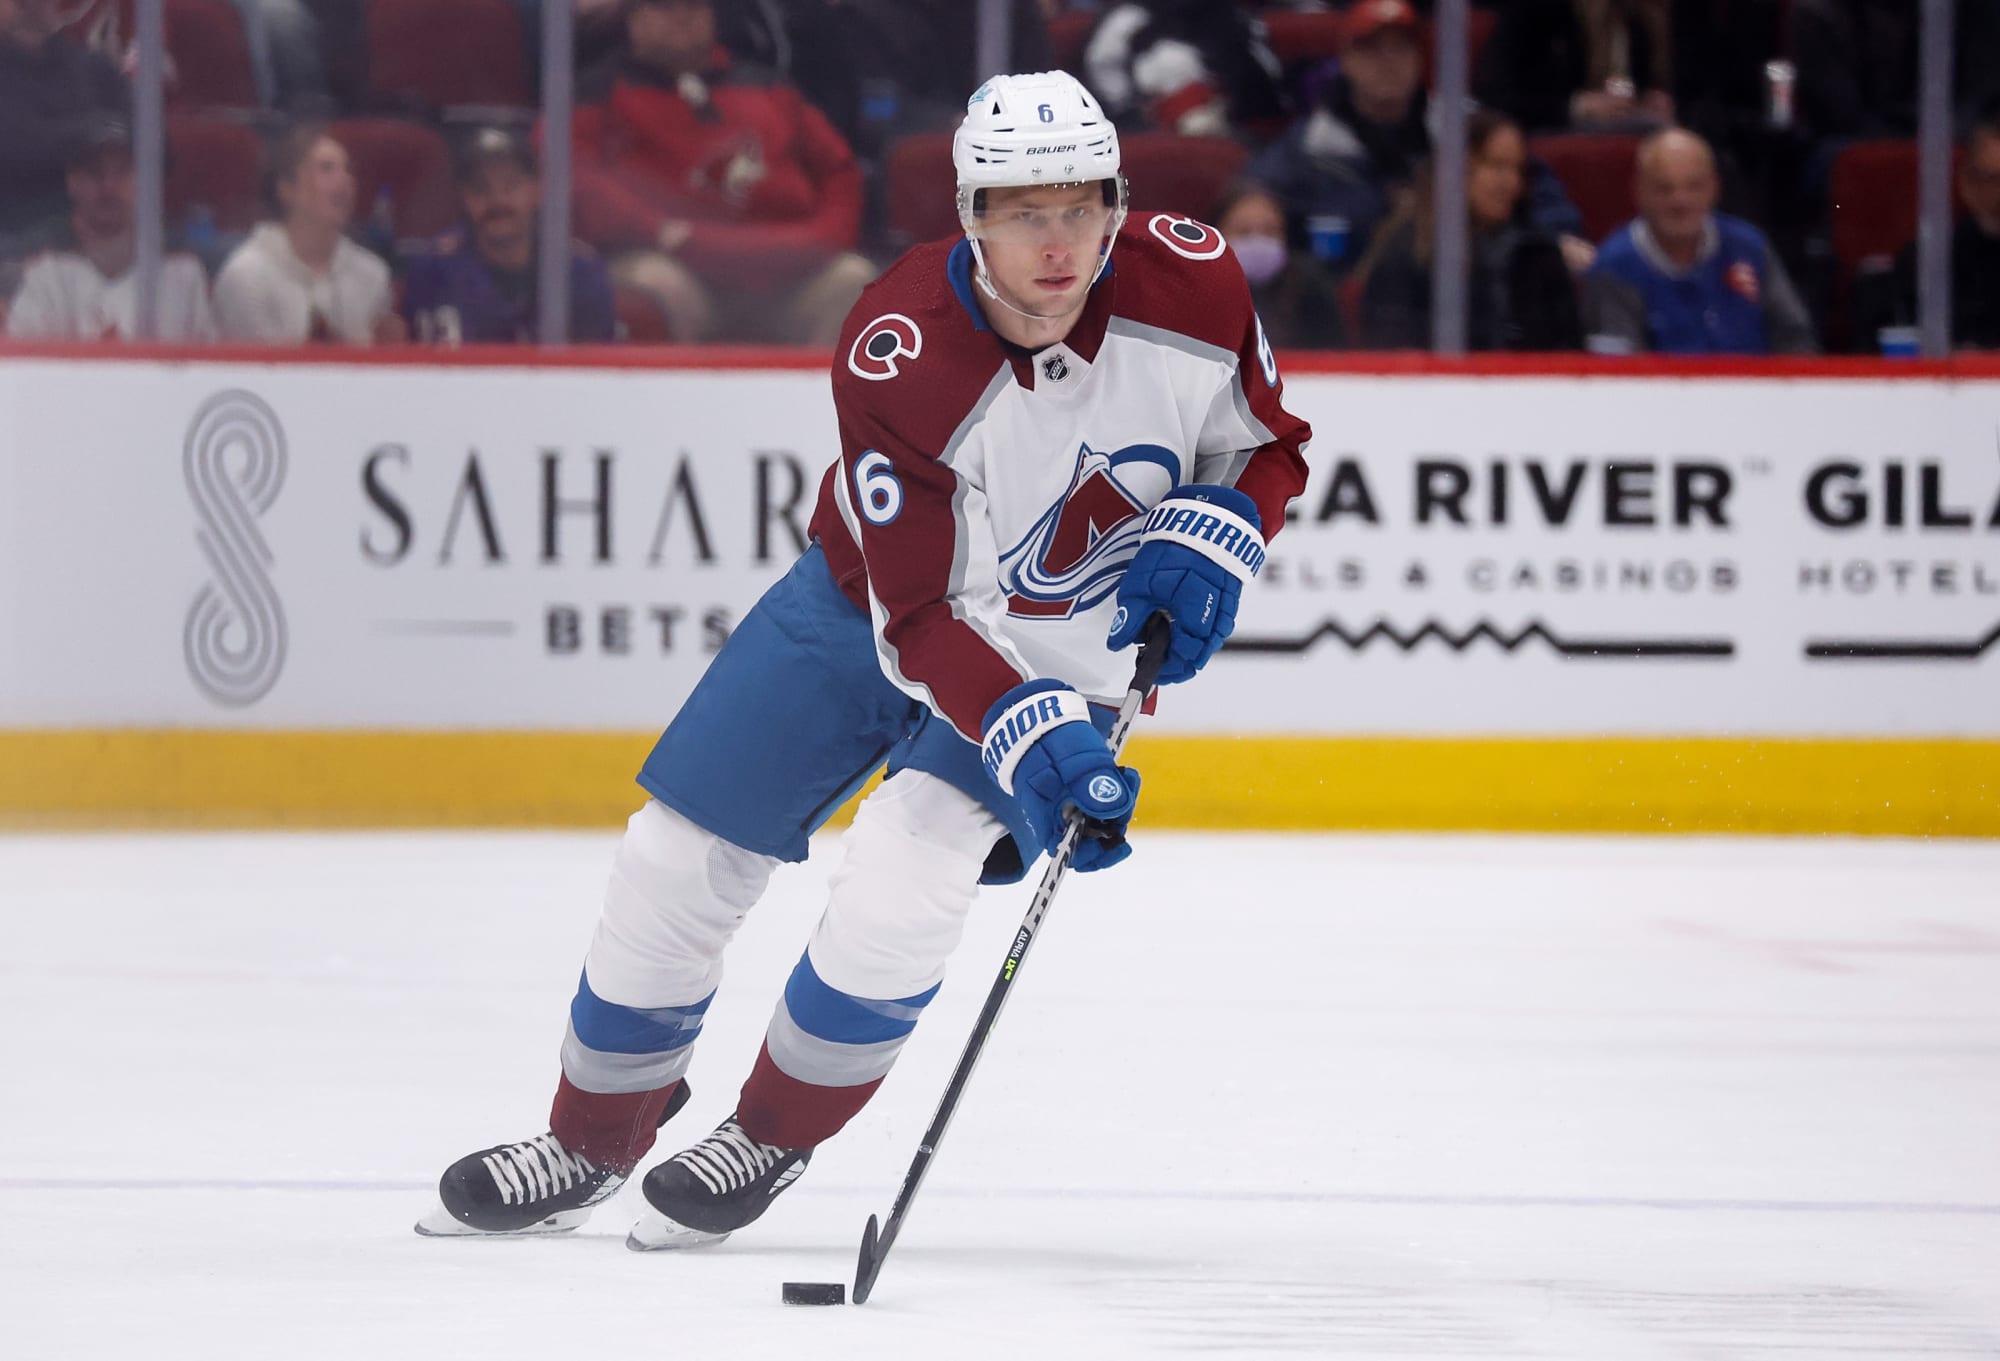 Erik Johnson Signs One Year Deal With New Team